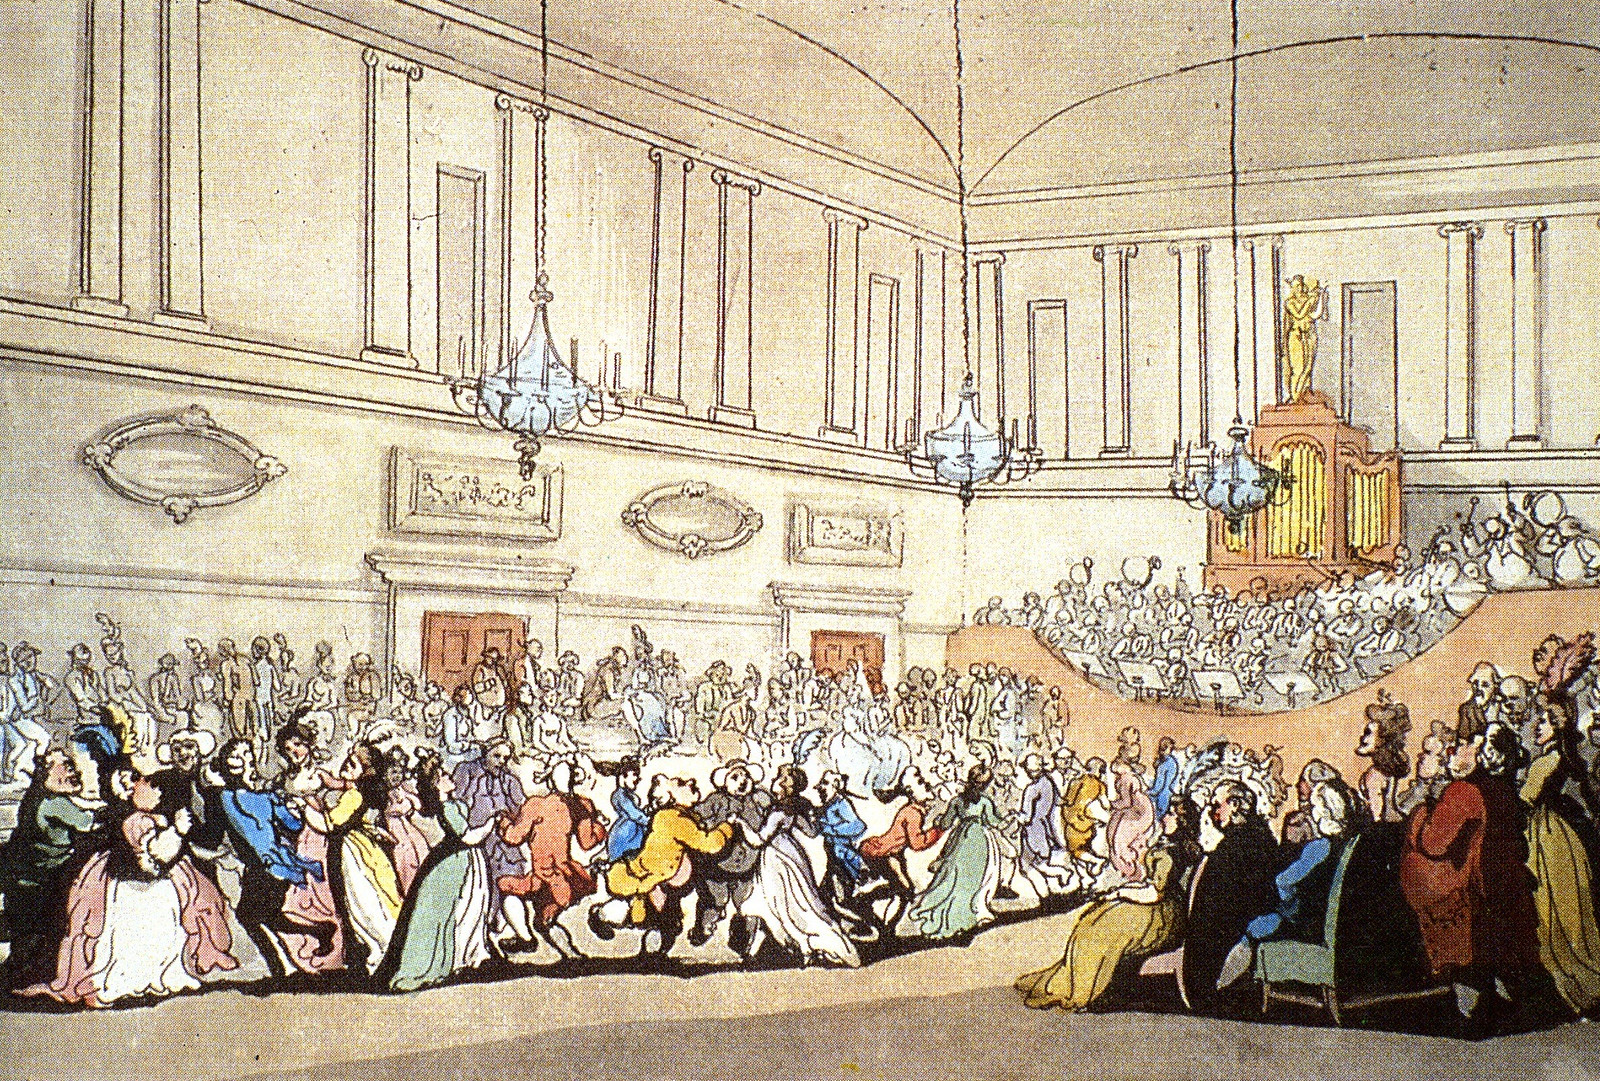 18th century illustration of the The Assembly Rooms